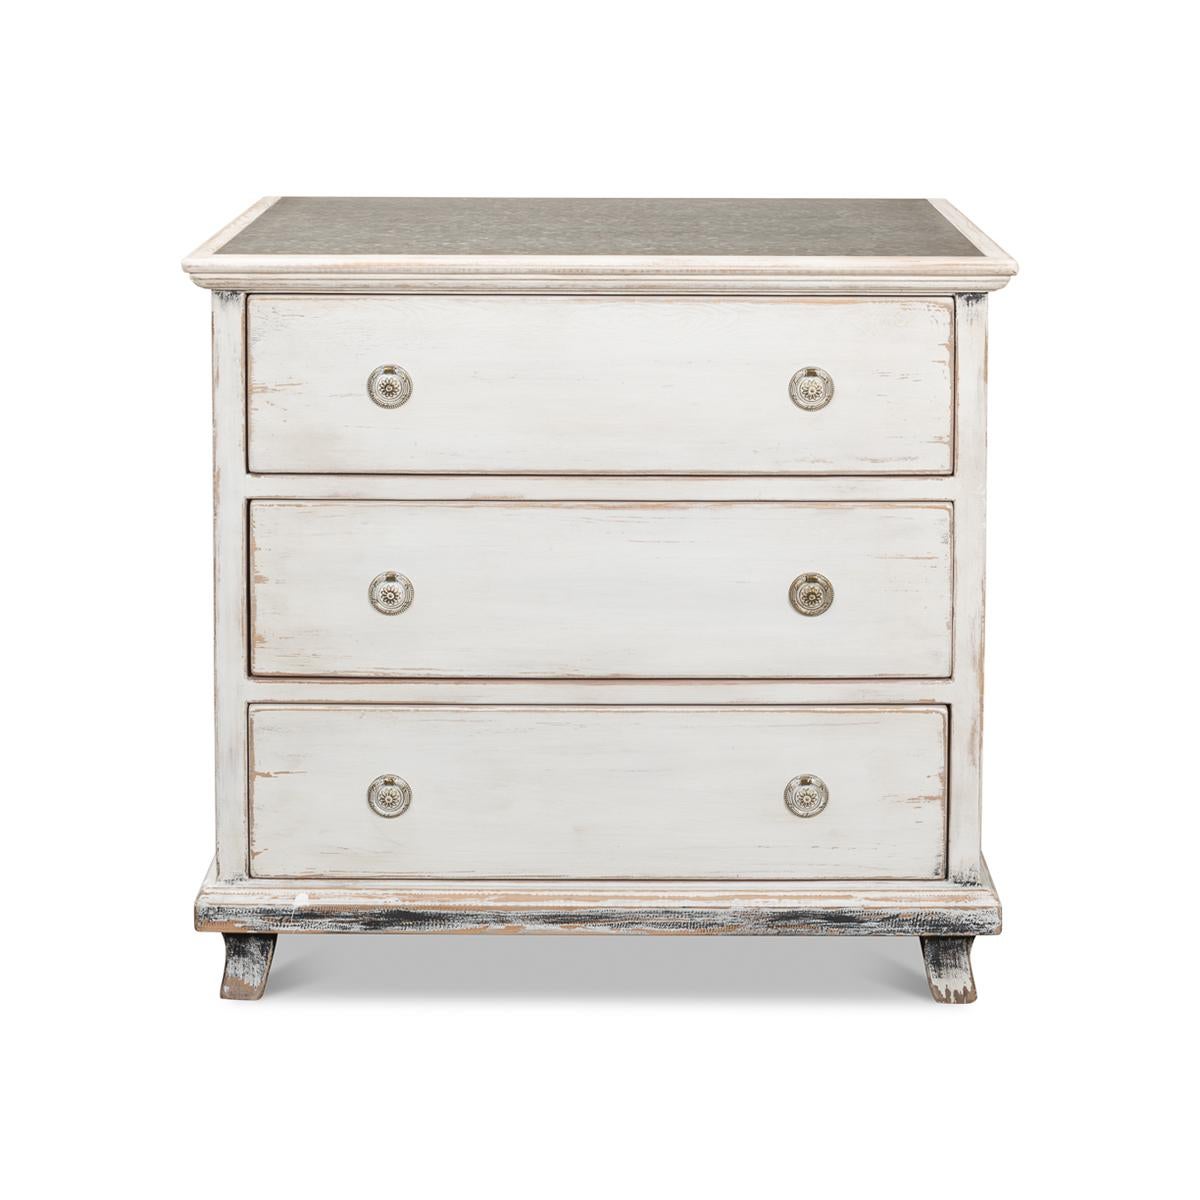 With three long drawers made of reclaimed pine in a hand-rubbed antiqued white painted finish, with zinc inlaid top. 

Dimensions: 35